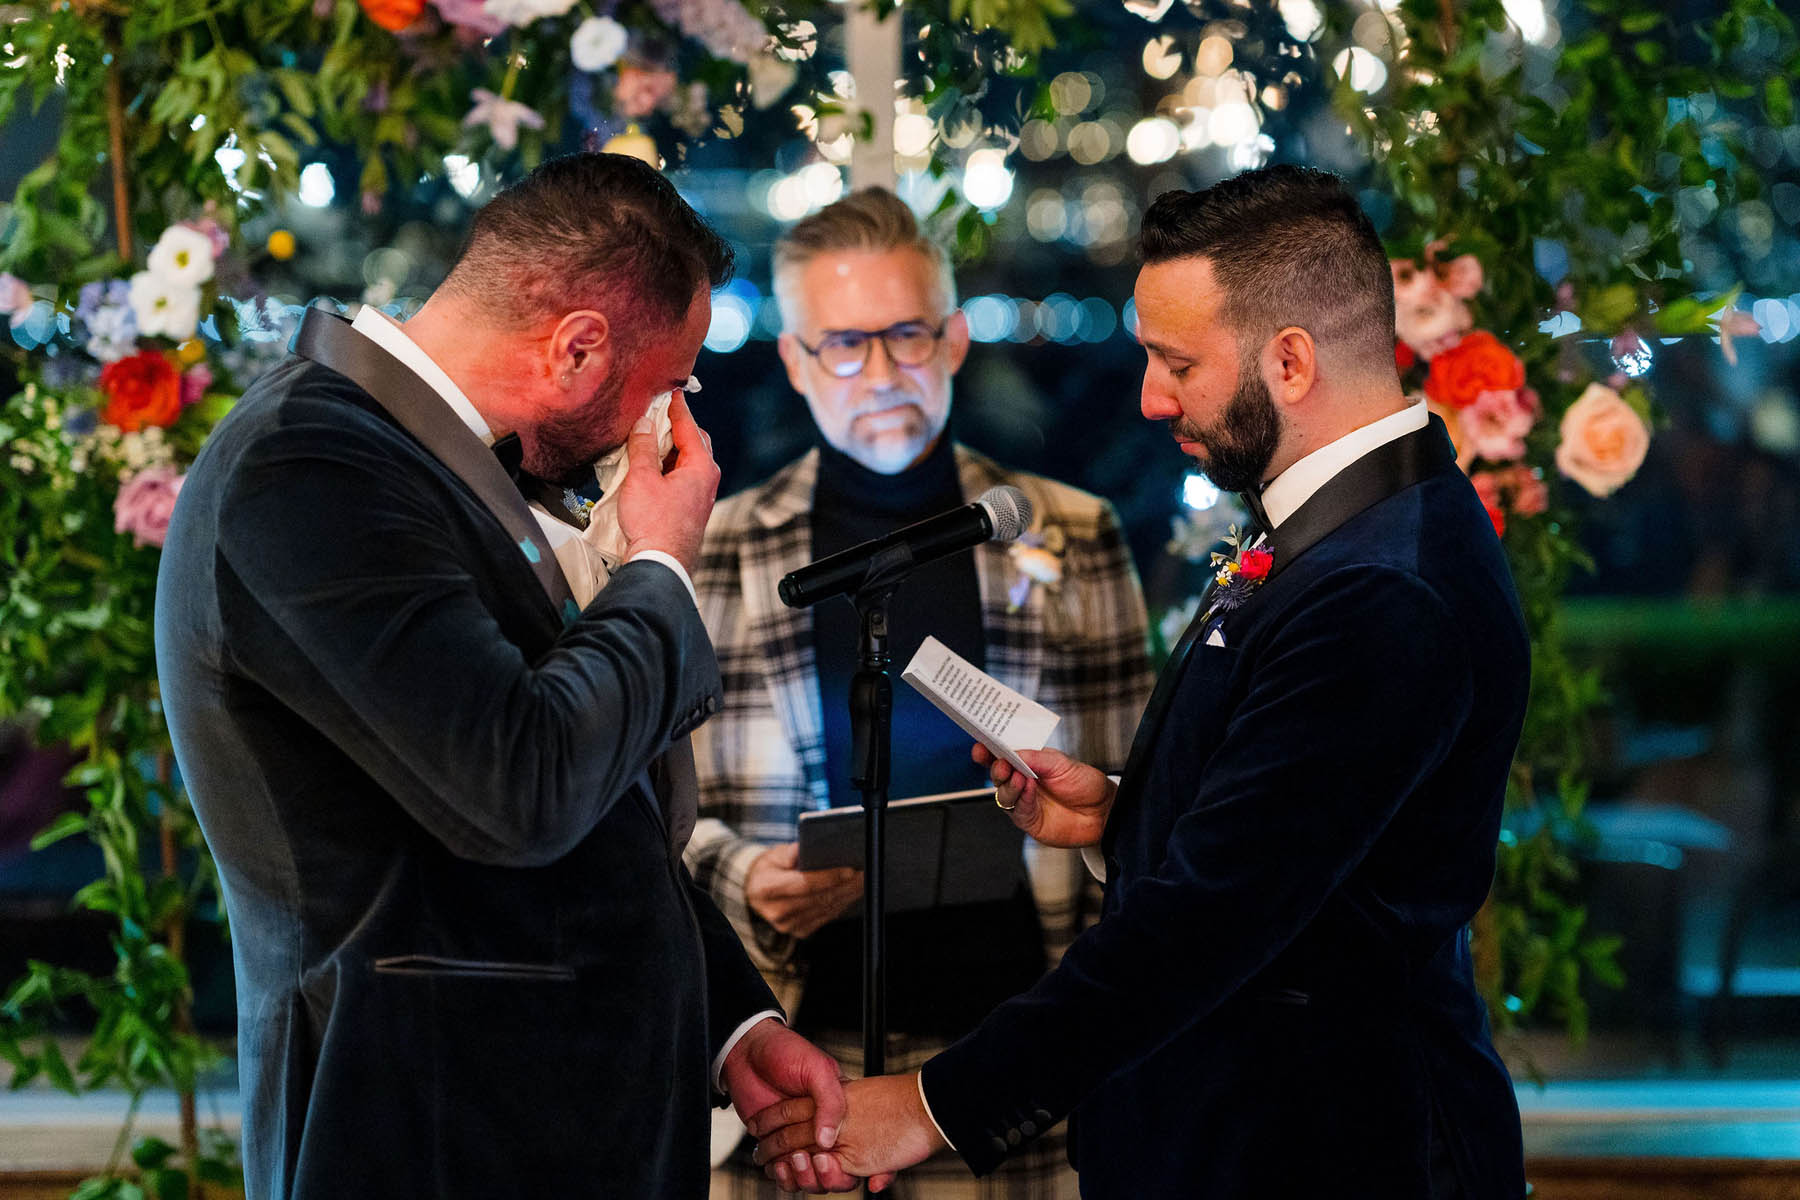 The grooms stand at the altar and one reads his vows. The other dabs his eye with a tissue.